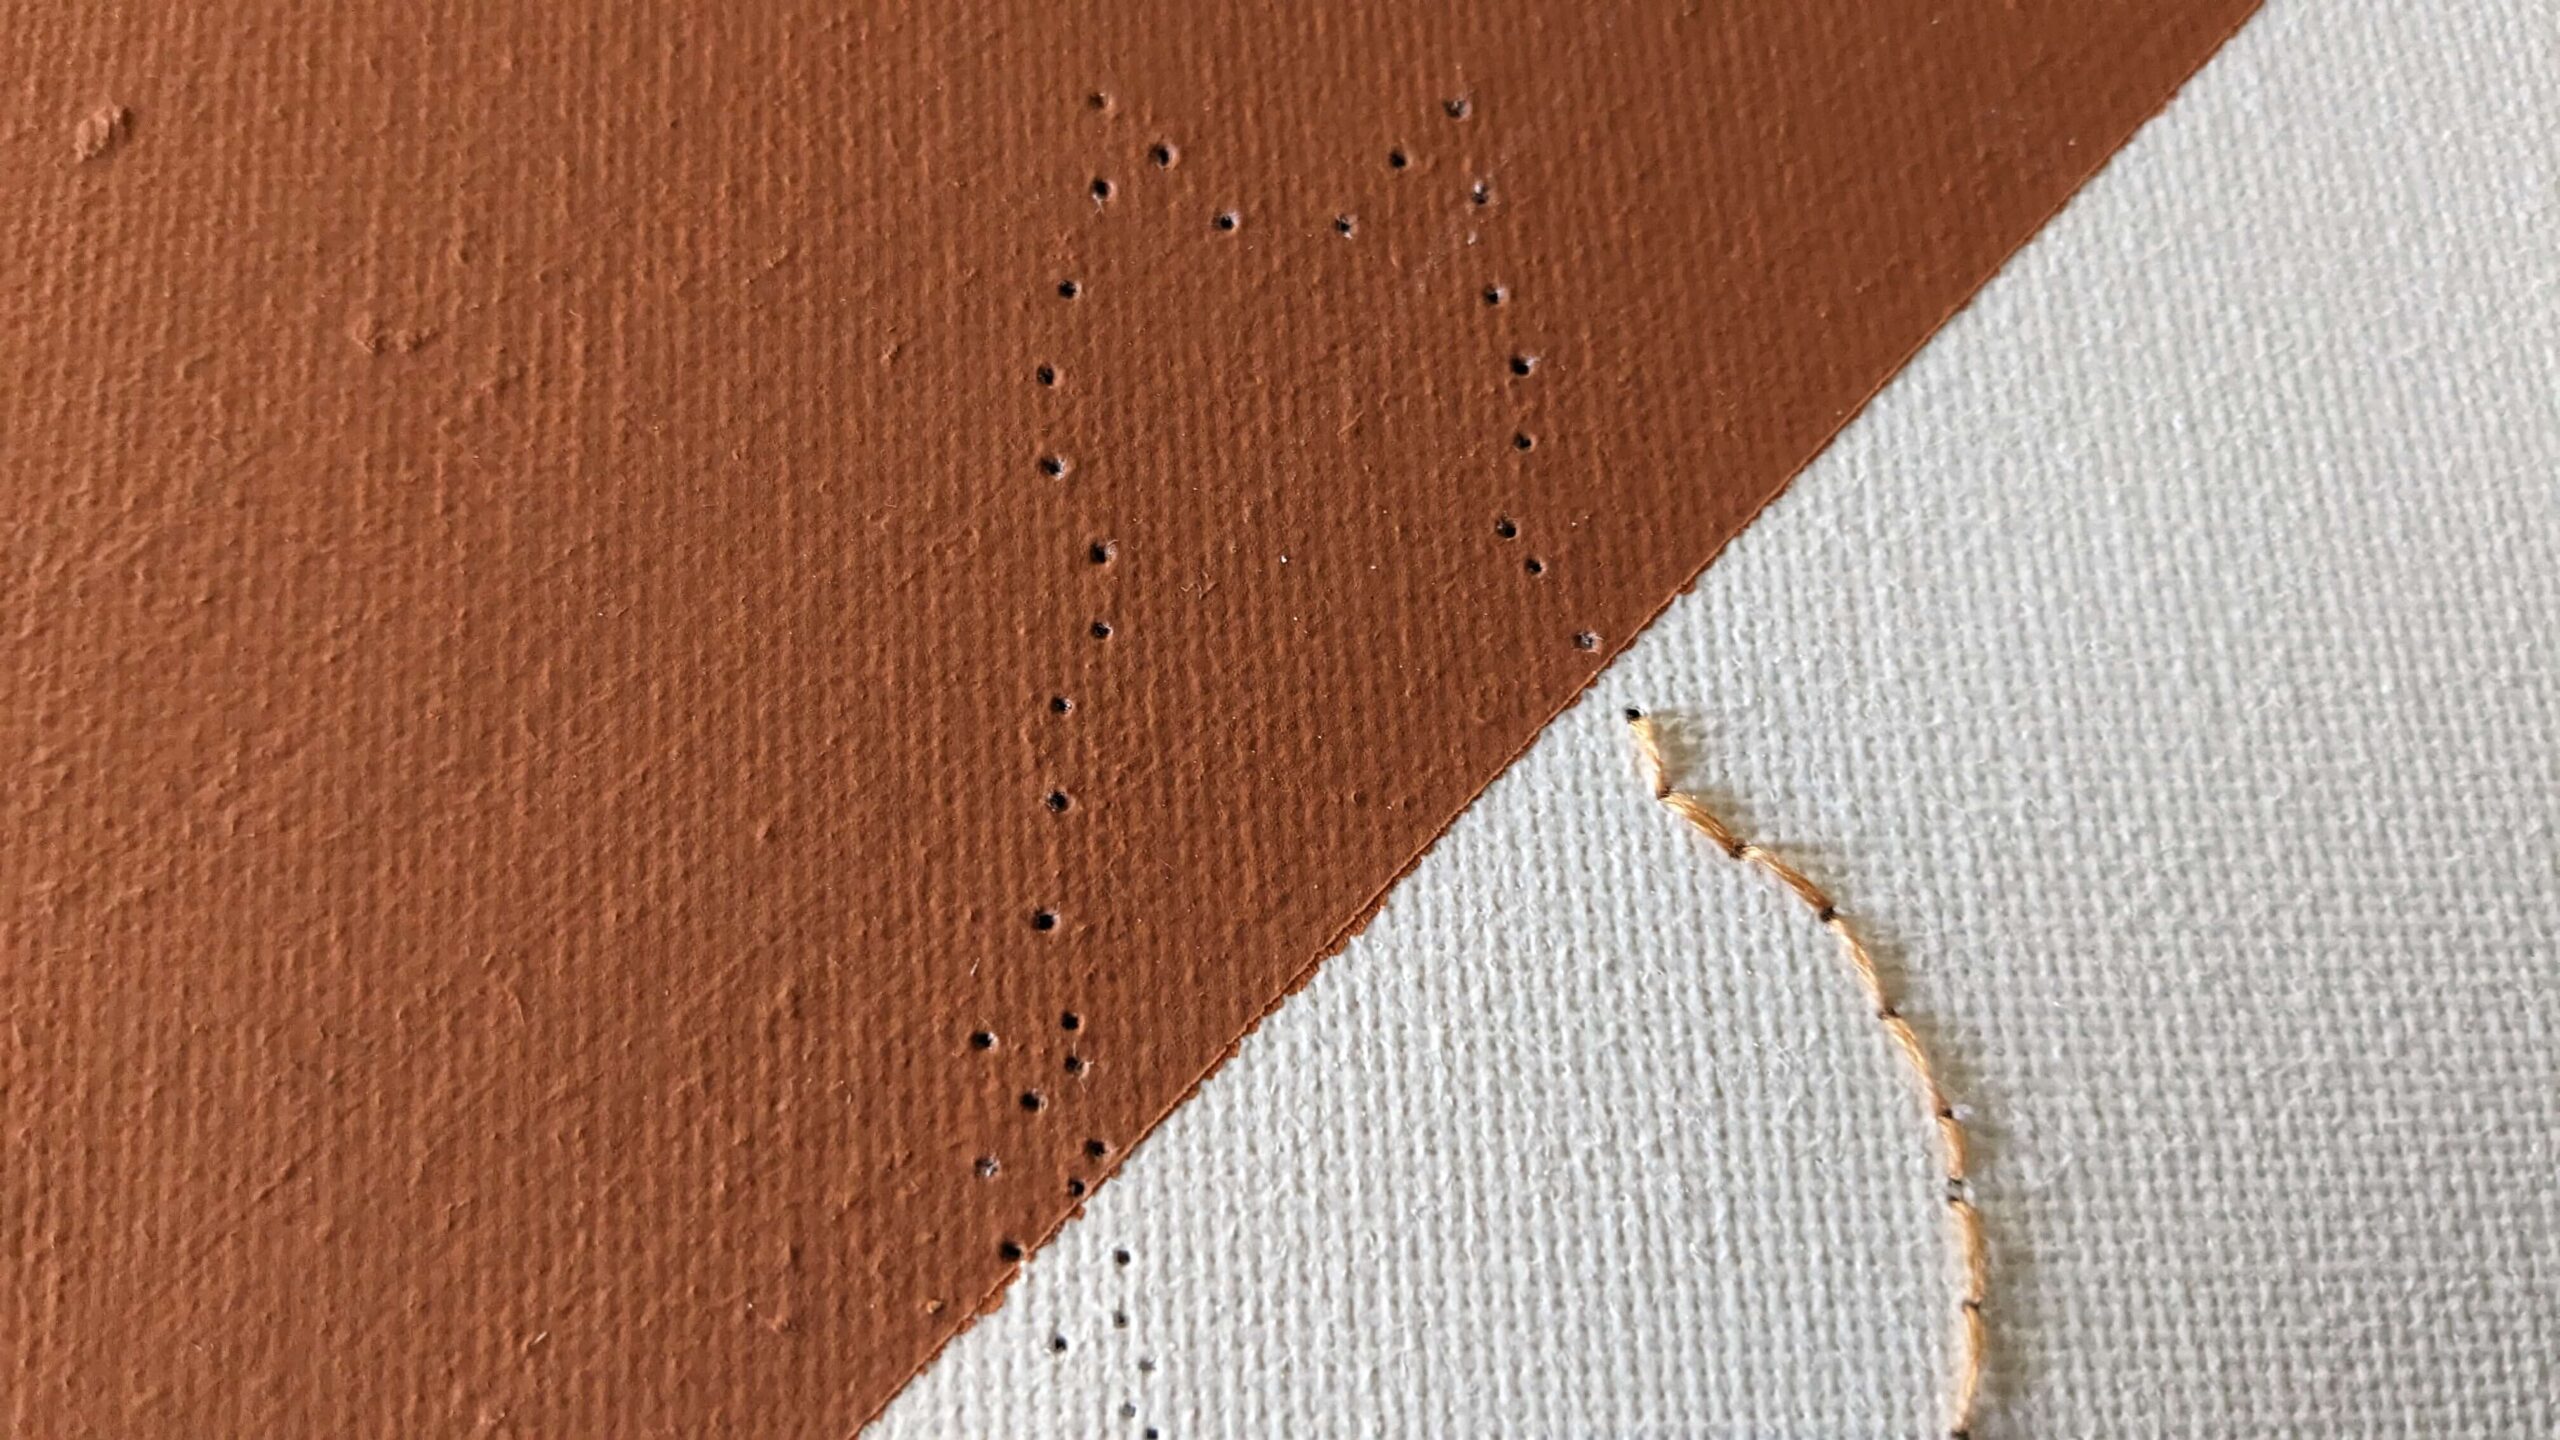 chain stitch in the shape of the lower half of a cat in orange embroidery floss in a square canvas that is diagonally painted half orange half white